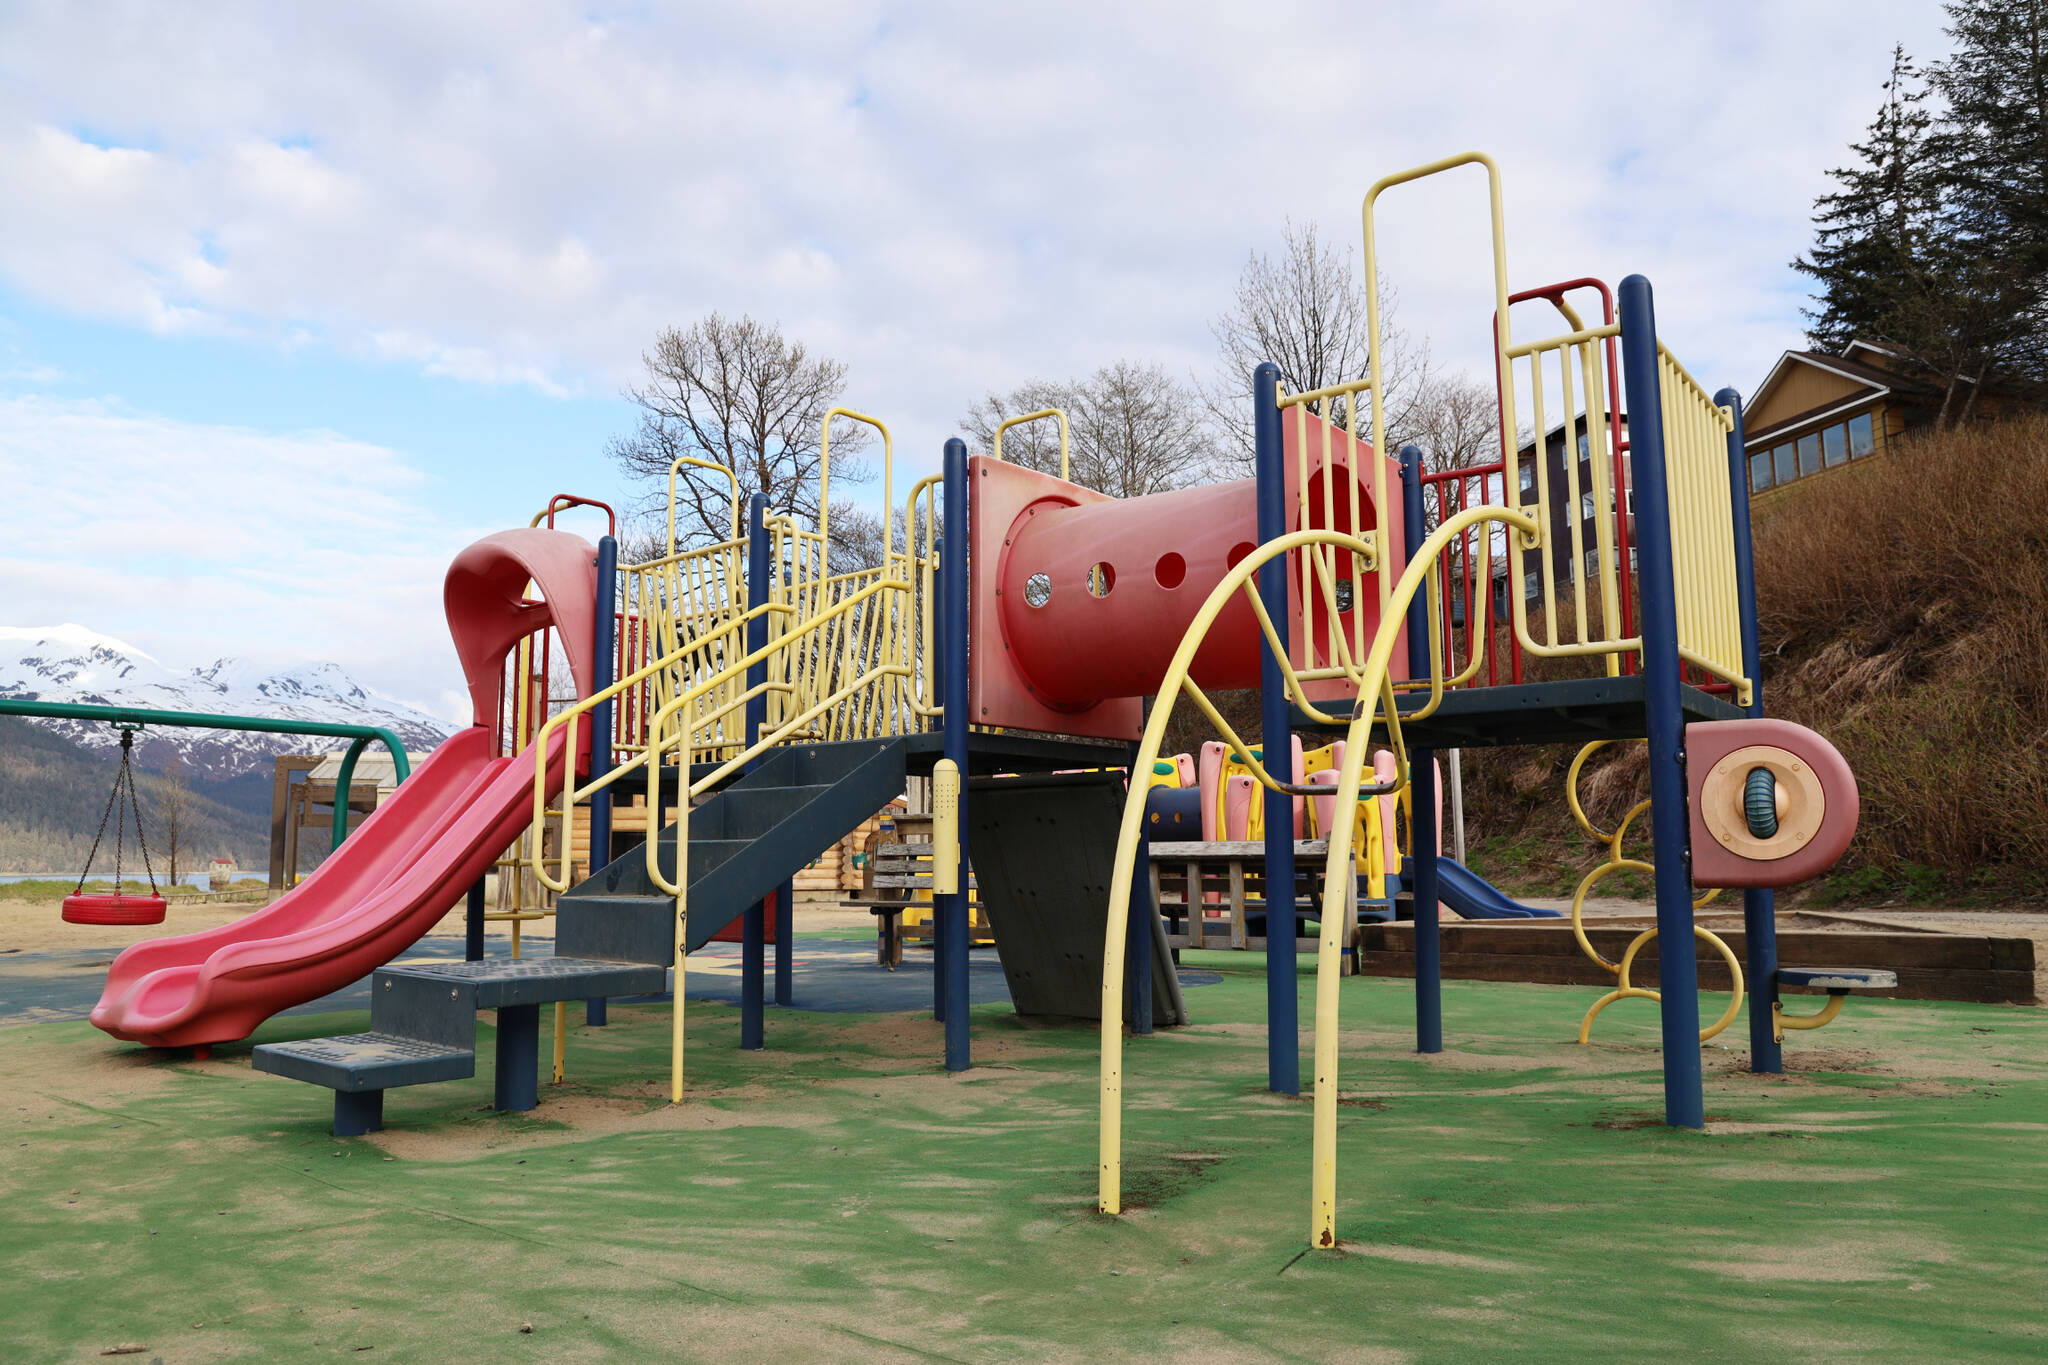 This Monday evening photo shows the Savikko Park playground on South Douglas. The playground is set to be replaced throughout the summer as a part of the City and Borough of Juneau’s park improvement project. (Clarise Larson / Juneau Empire)